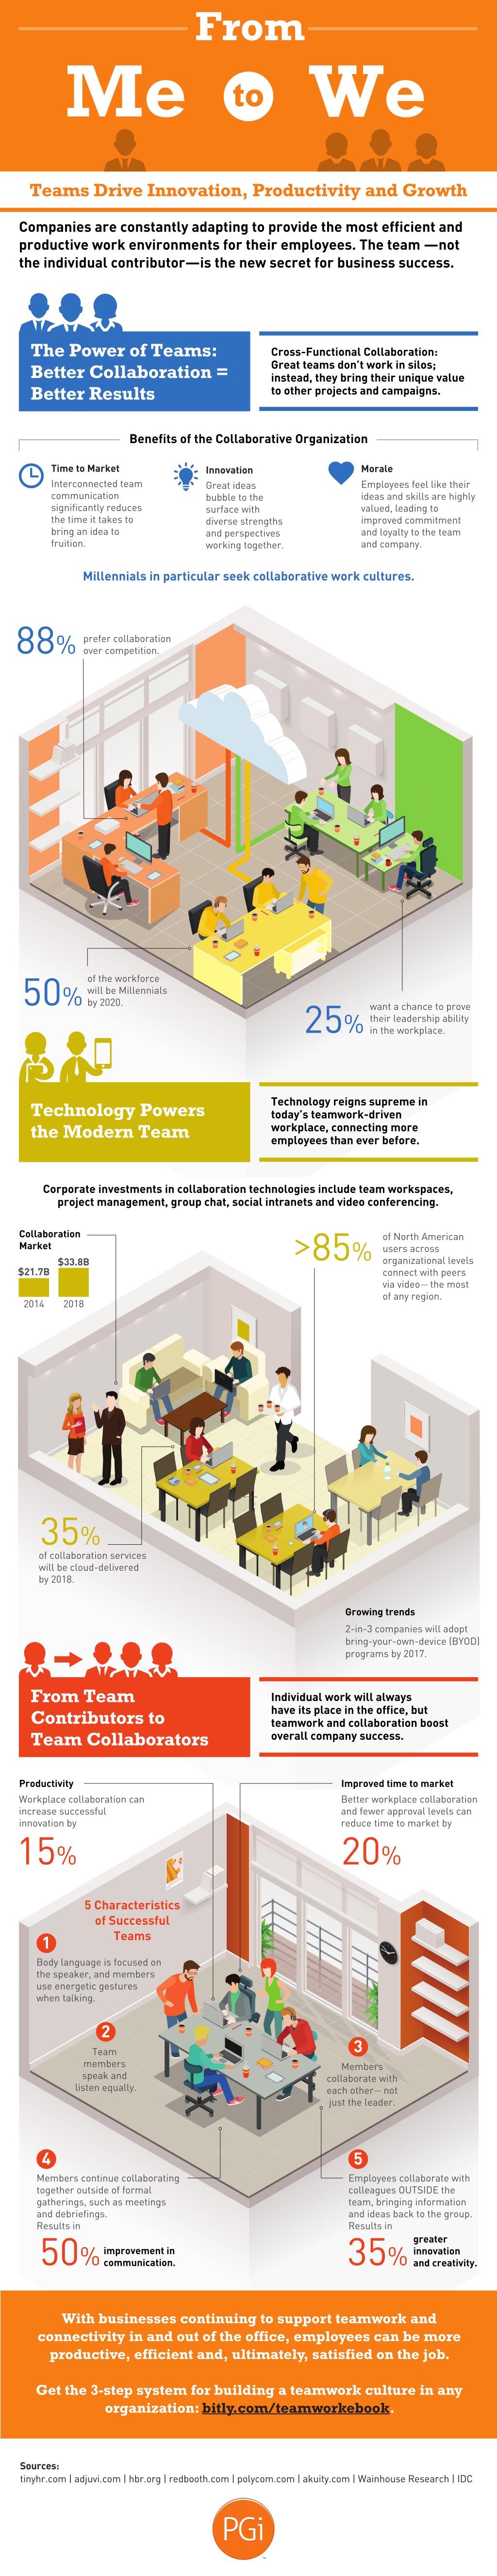 infographic-studies-reveal-the-real-benefits-of-teamwork-in-business-1-1024